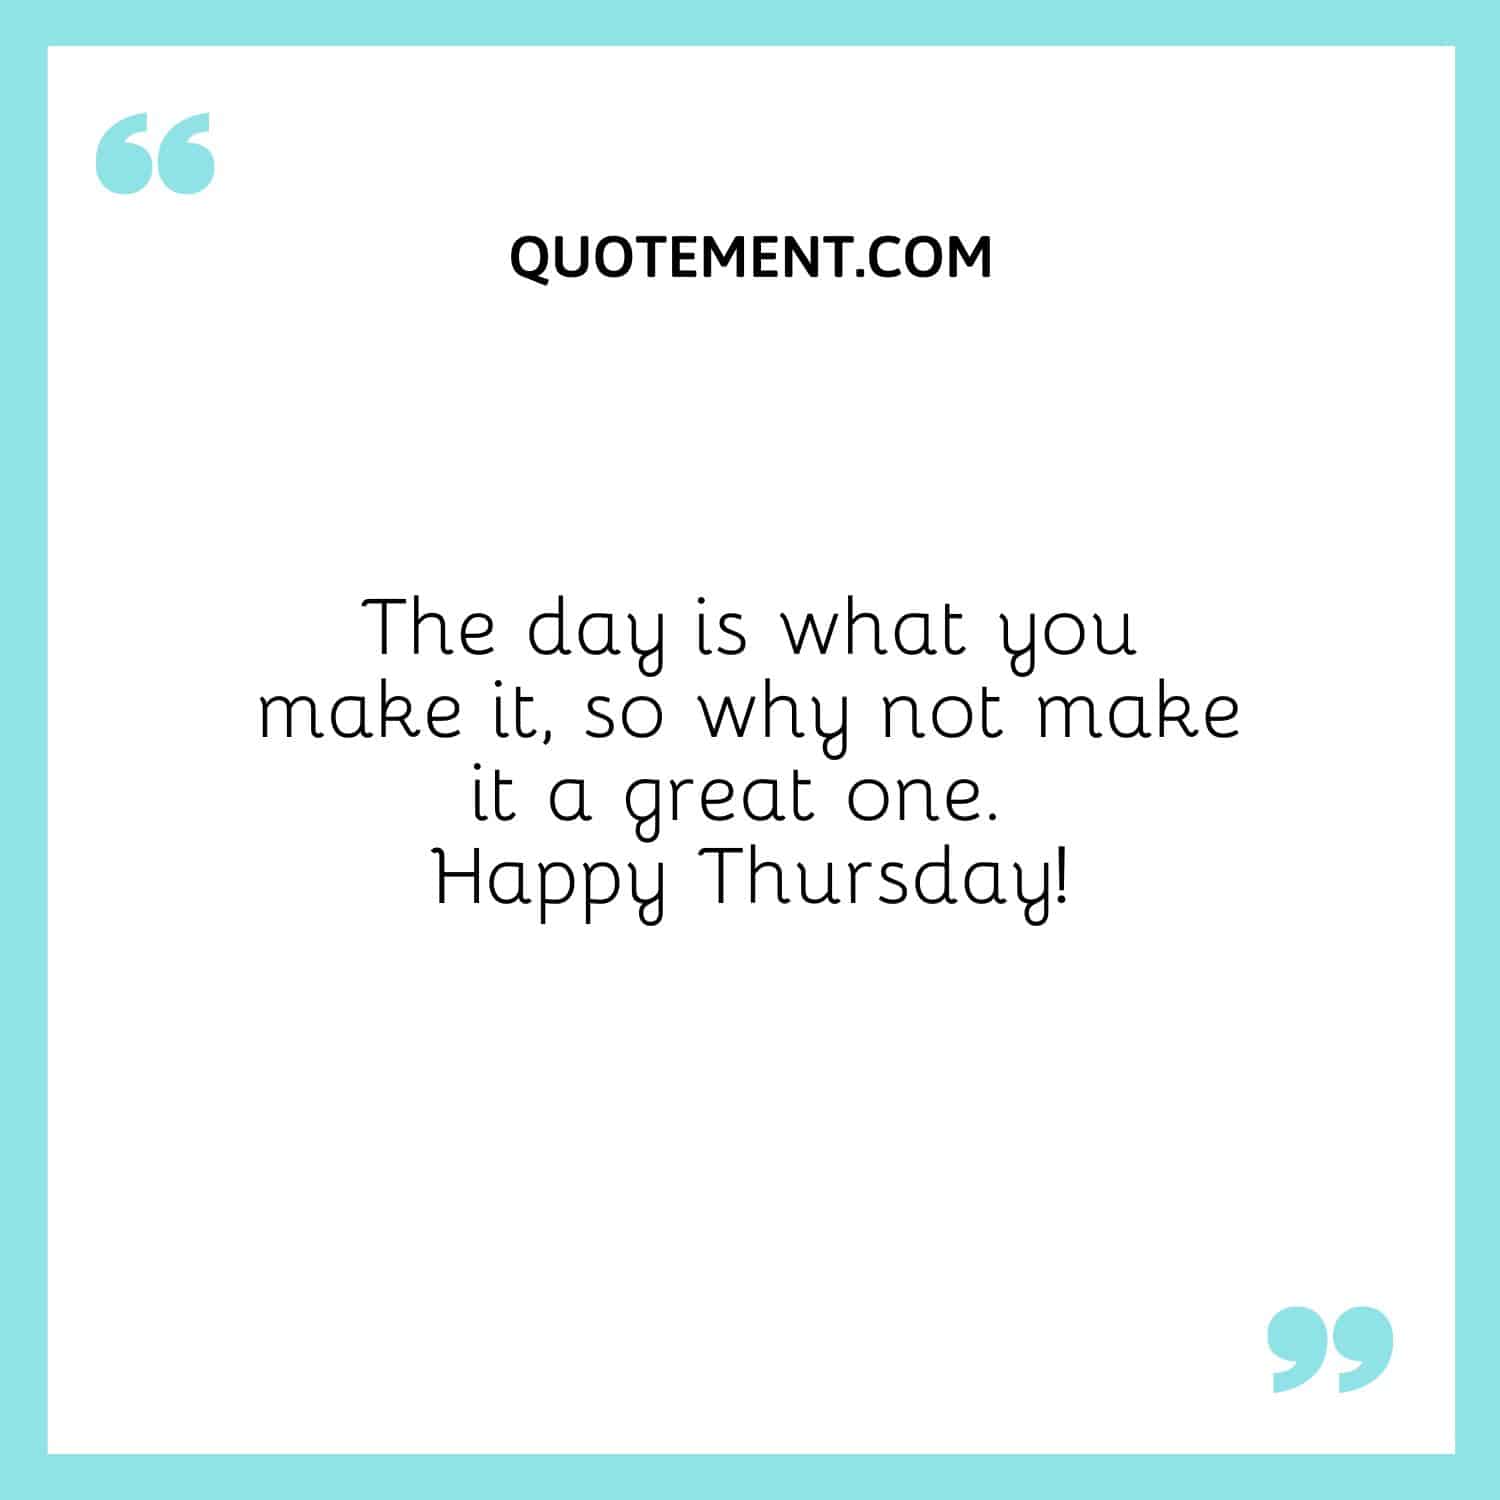 The day is what you make it, so why not make it a great one. Happy Thursday